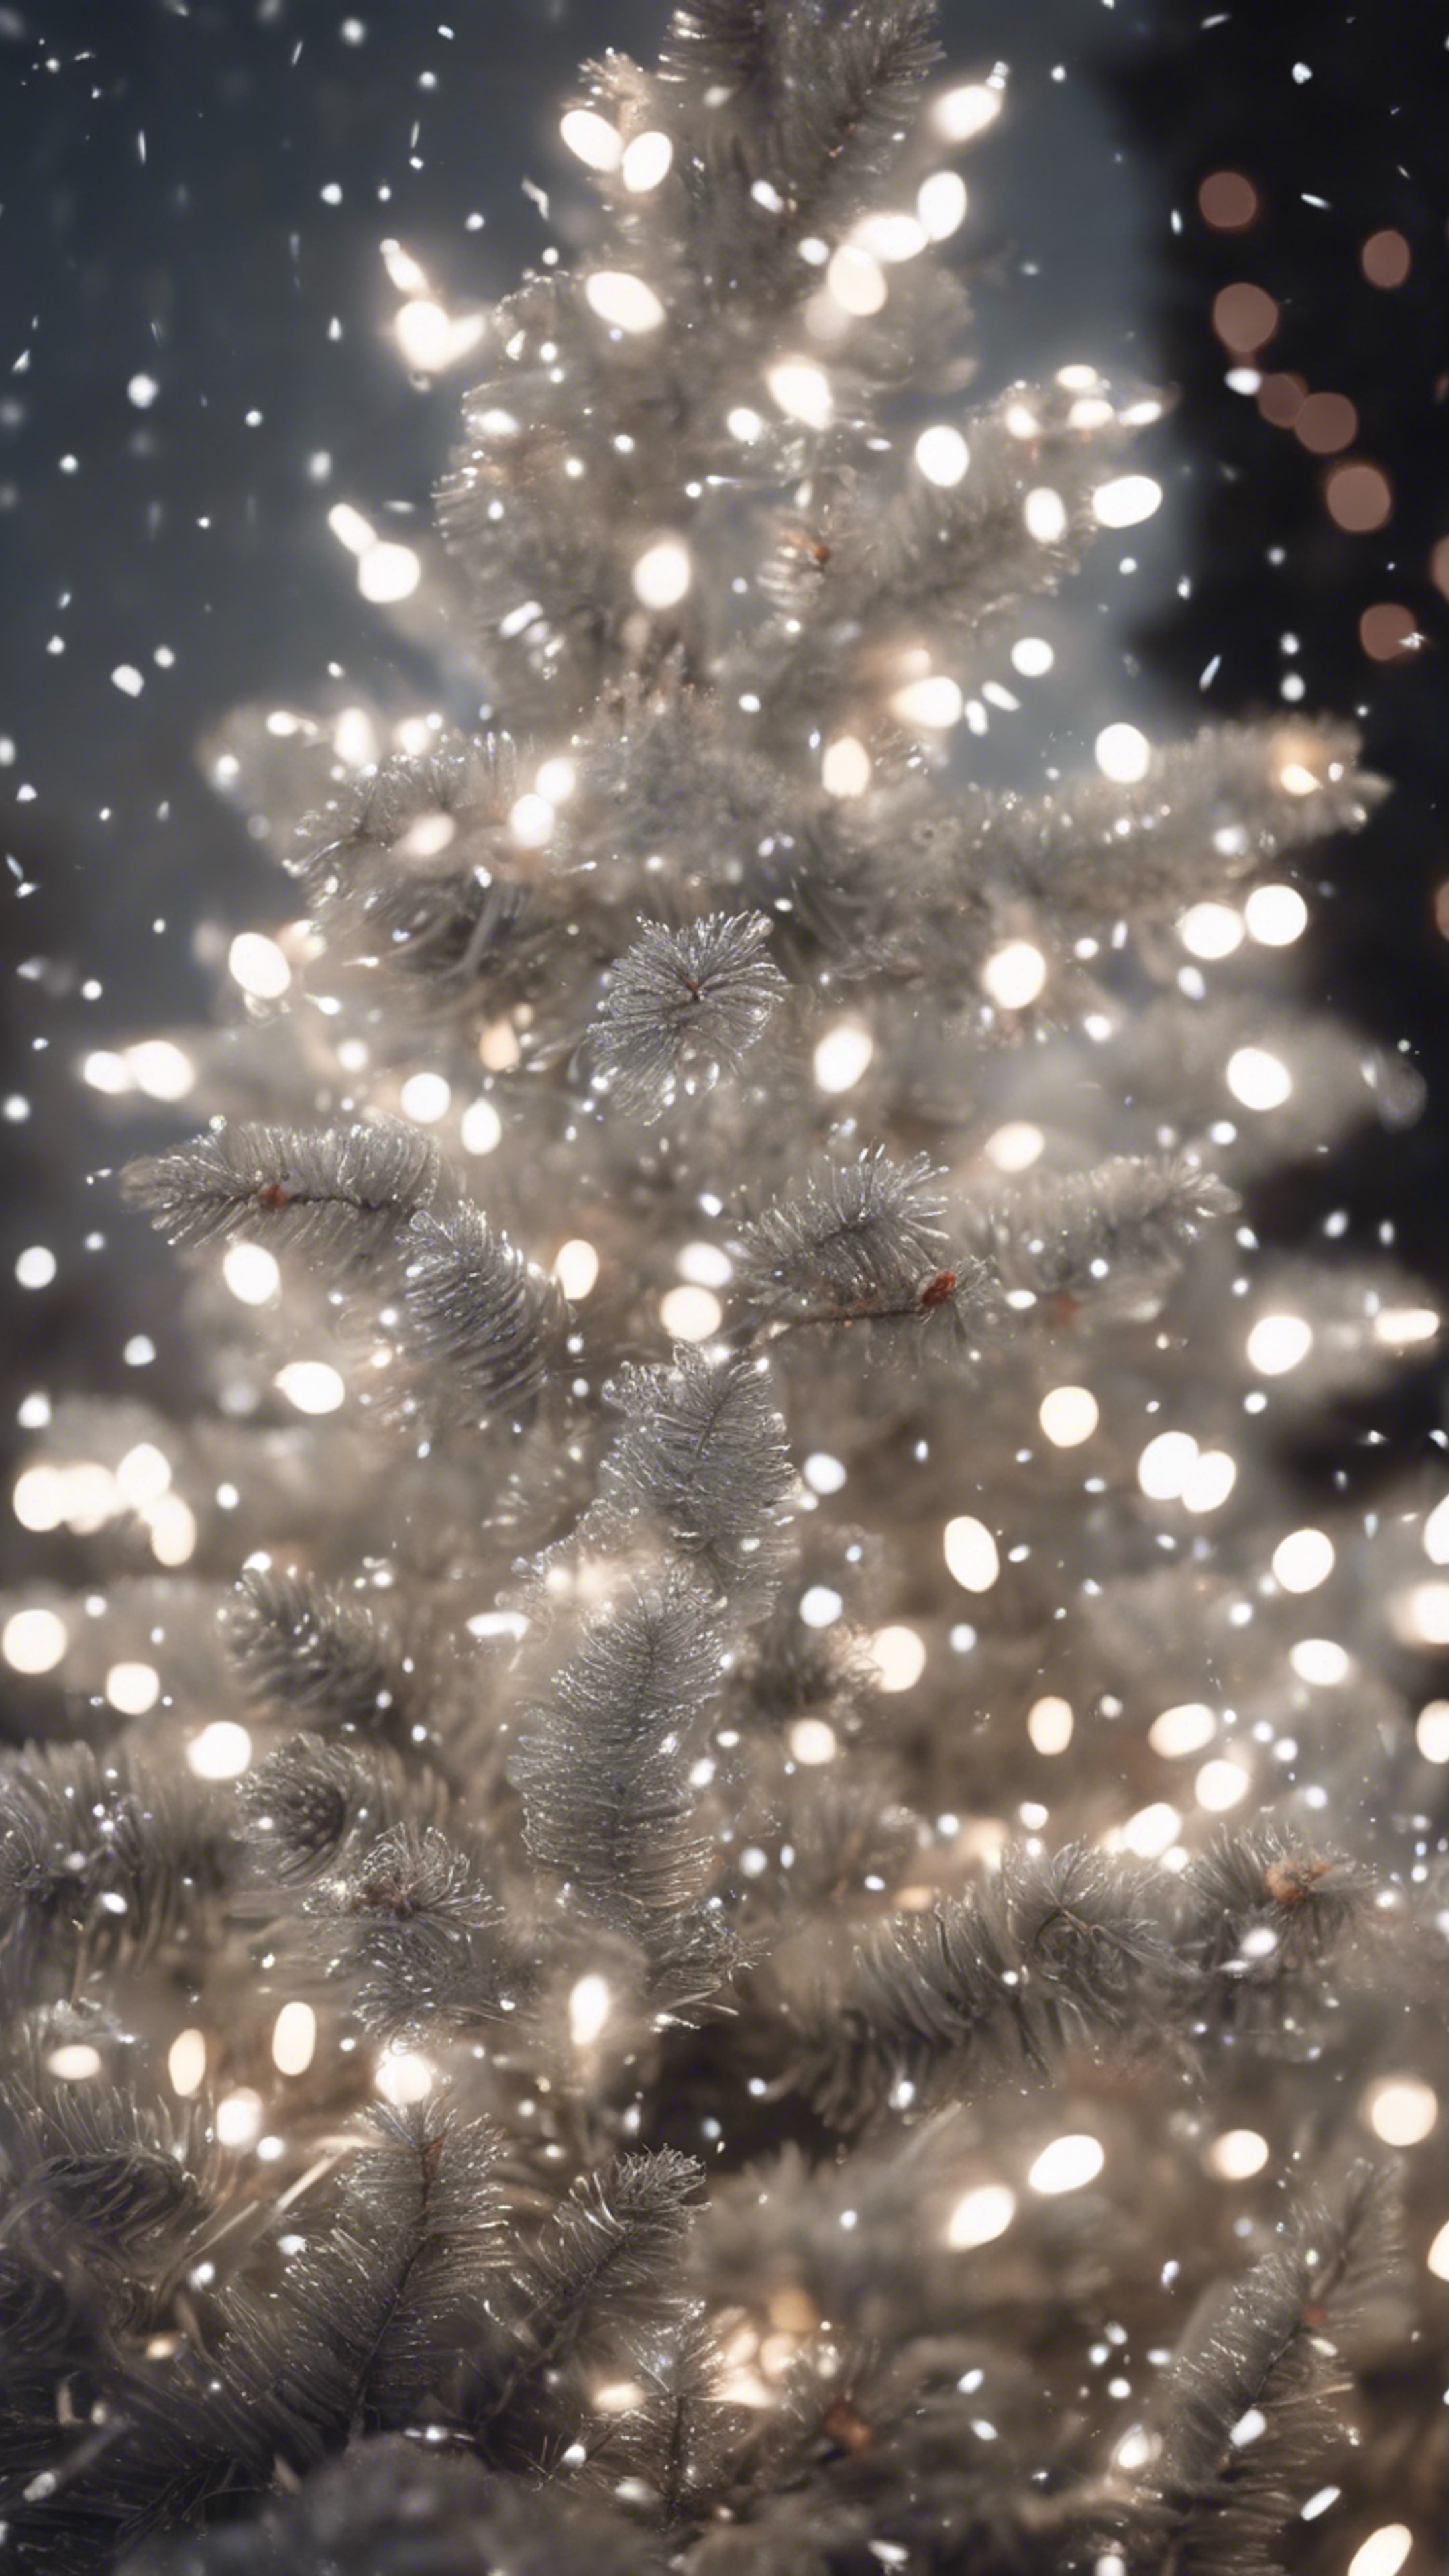 White Christmas lights shimmering on a silver spruce tree, with delicate snowflakes falling around. Ფონი[aebc3baa8421448a9f7c]